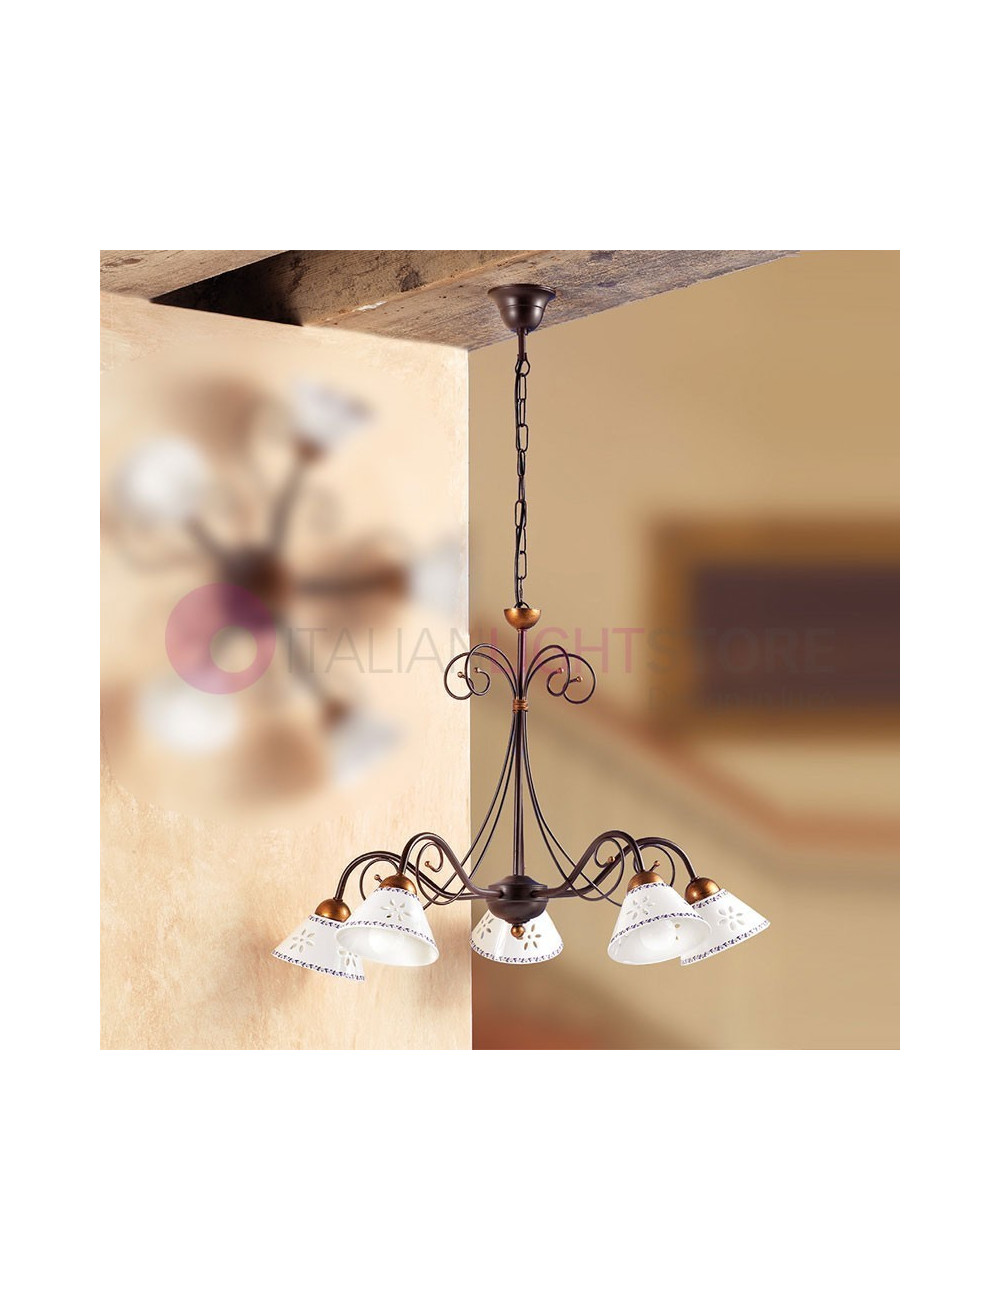 MASSAROSA Chandelier Rustic Country Hanging Light 5-Bulb Metal and Ceramic